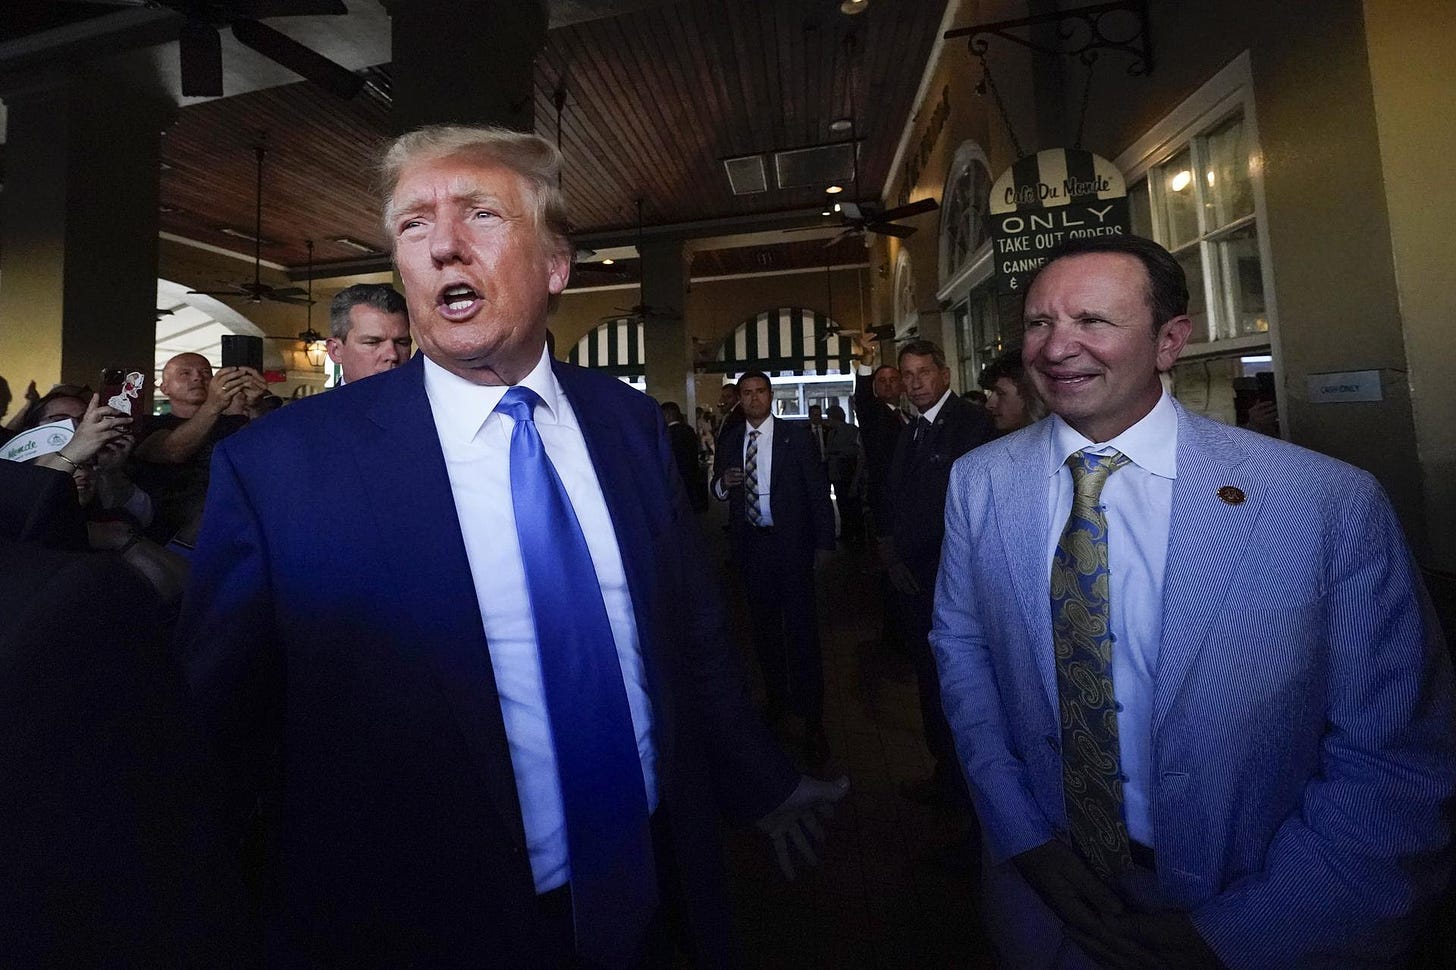 Donald Trump visits Café du Monde in New Orleans, accompanied by Louisiana Attorney General Jeff Landry, right.